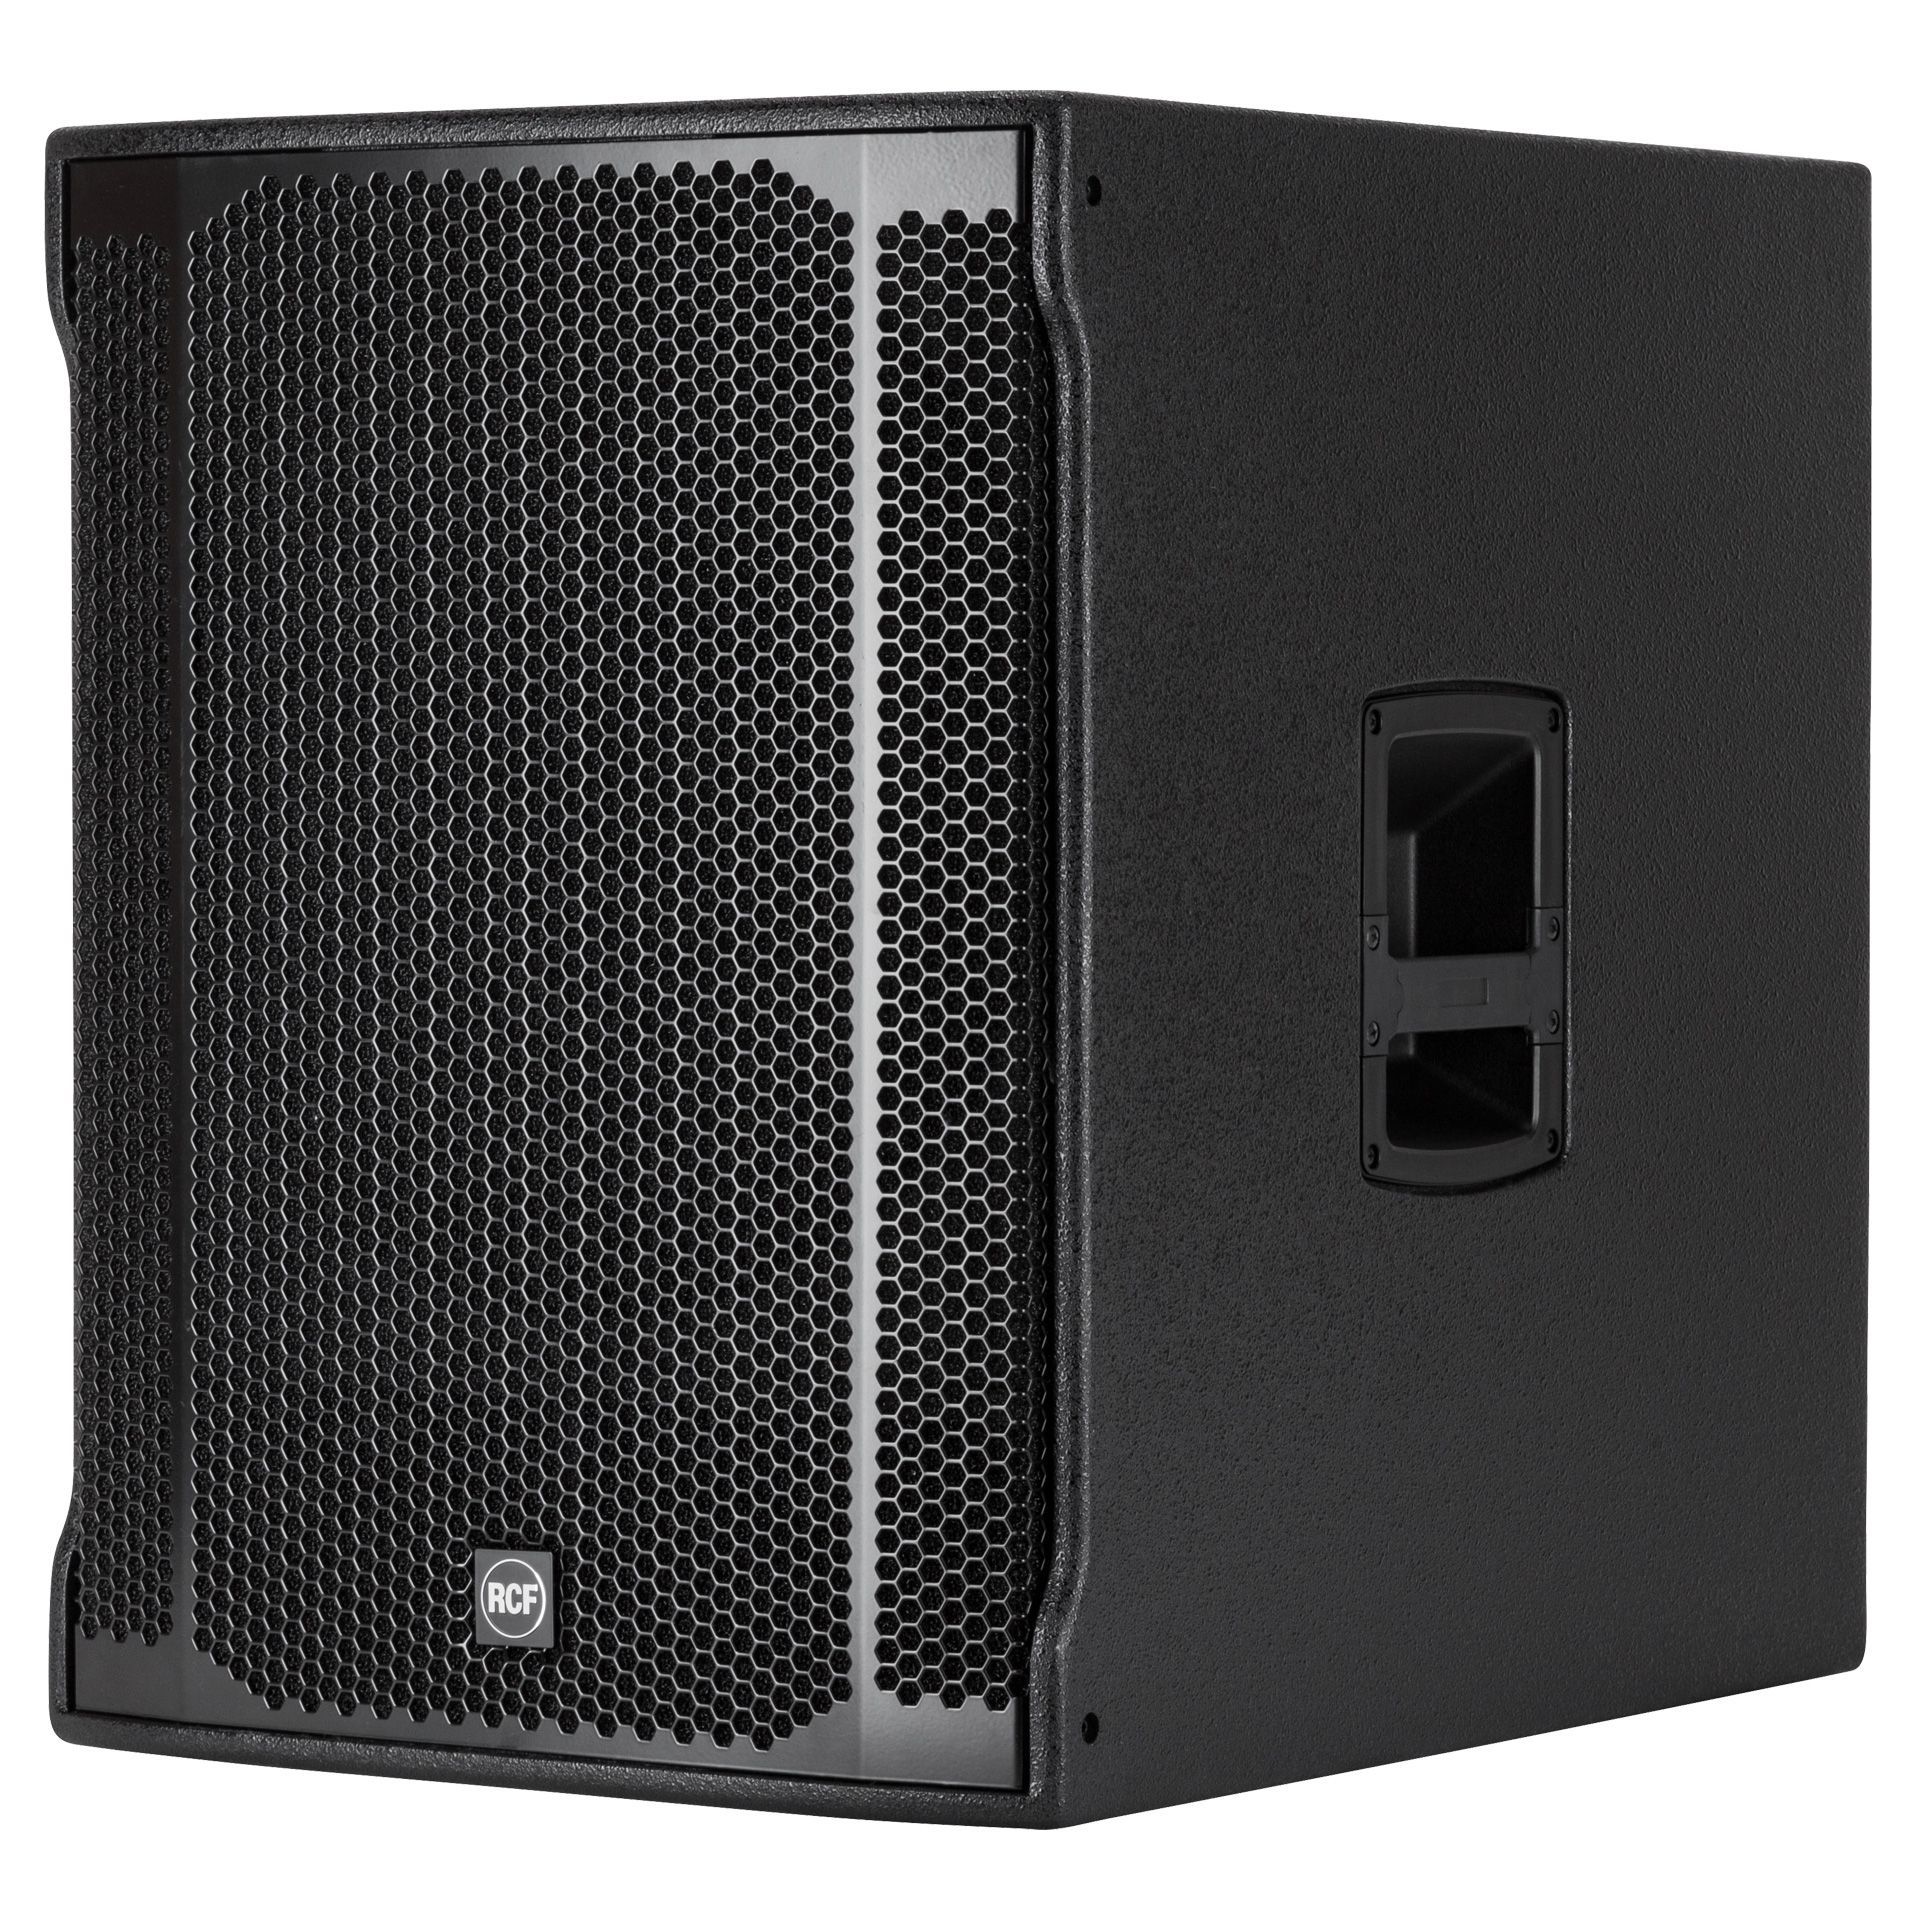 RCF SUB 905 AS ll Aktiver Subwoofer 15 mit Digitalendstufe 2200W 1100W RMS  - Onlineshop Musikhaus Markstein